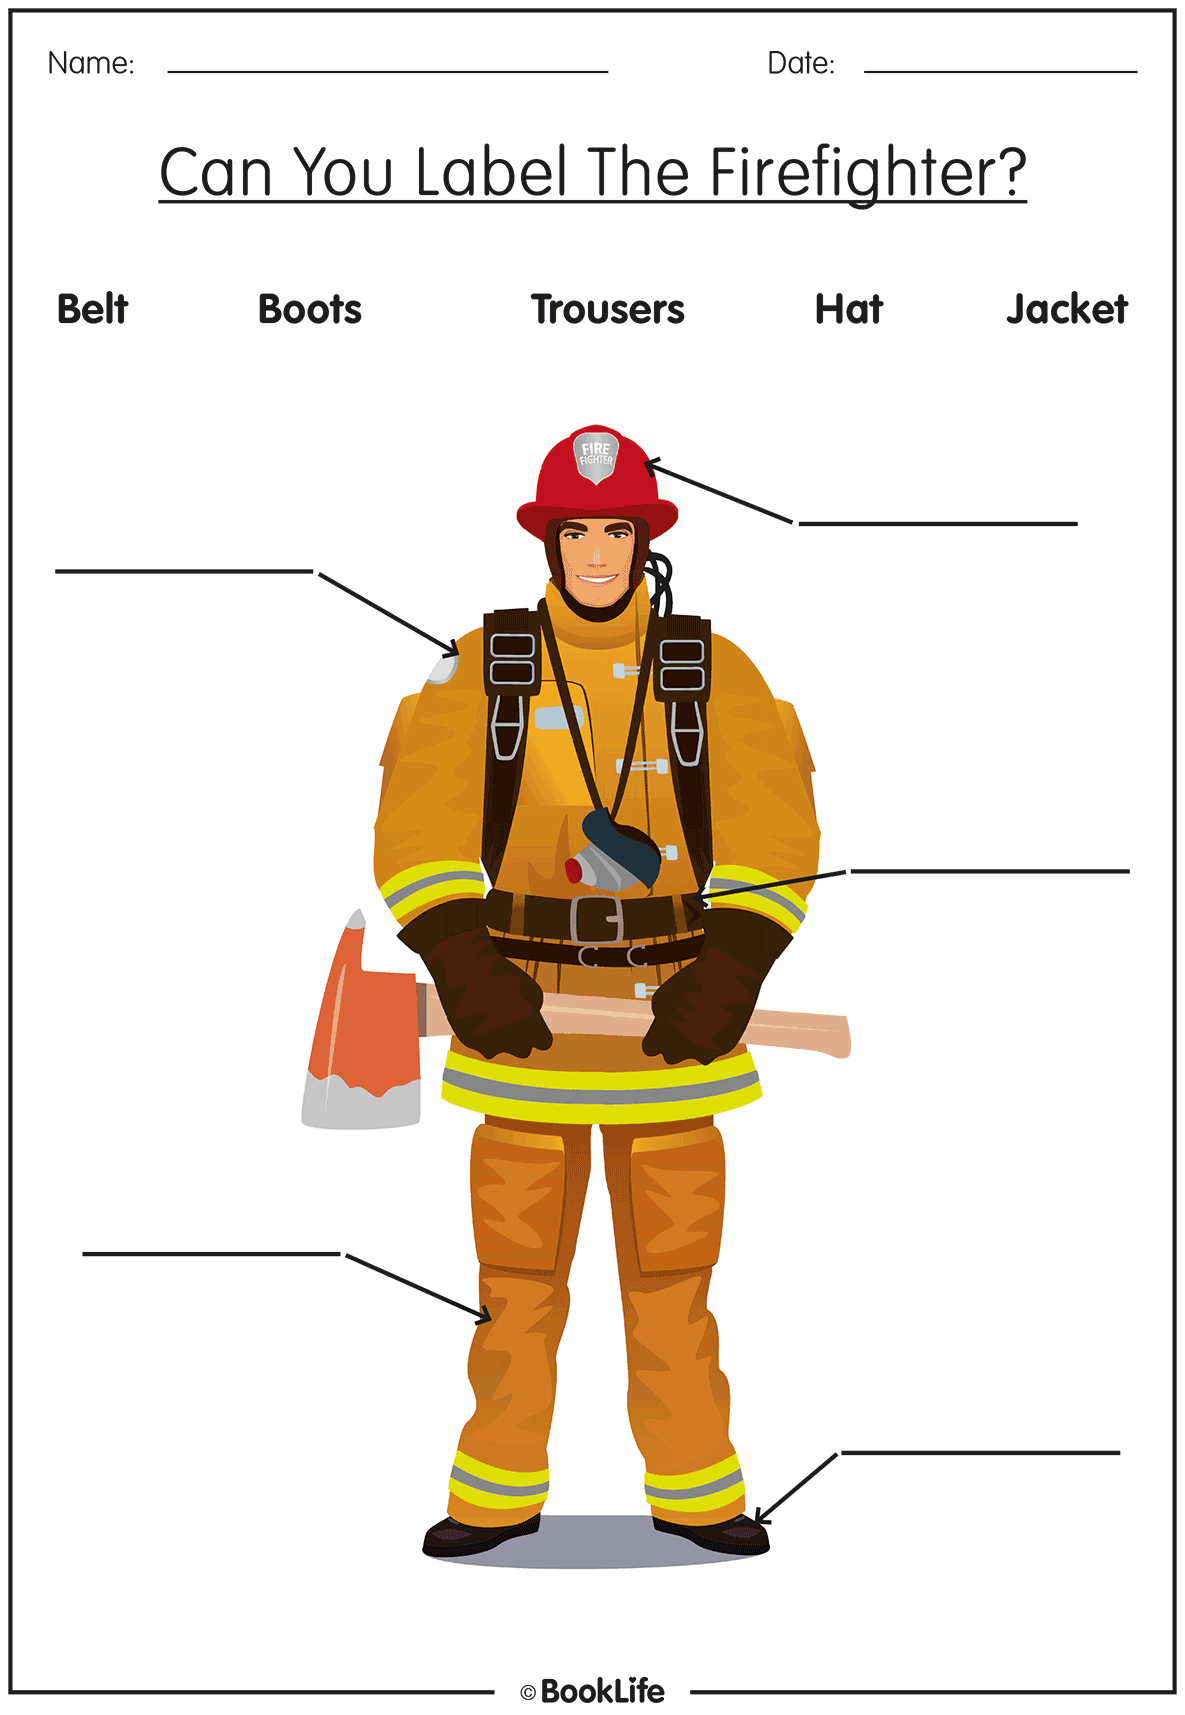 Can You Label The Firefighter? by BookLife